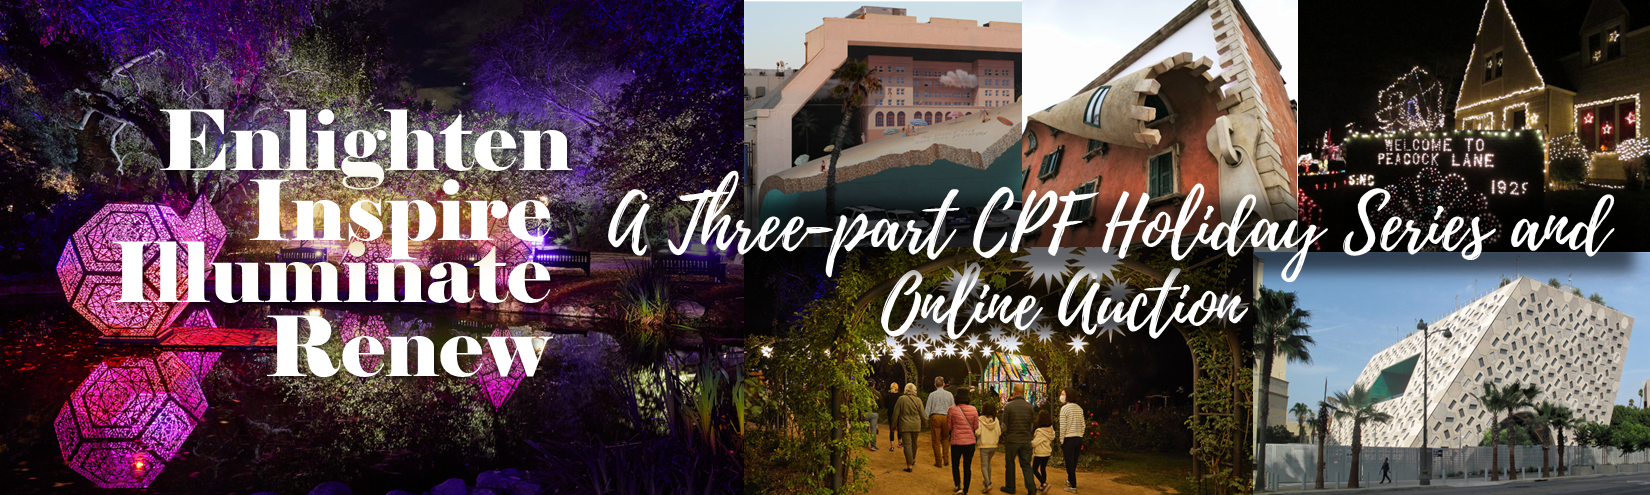 EnLIGHTenment, Illusion, and Inspiration:  A Three-part CPF Holiday Series on Renewal